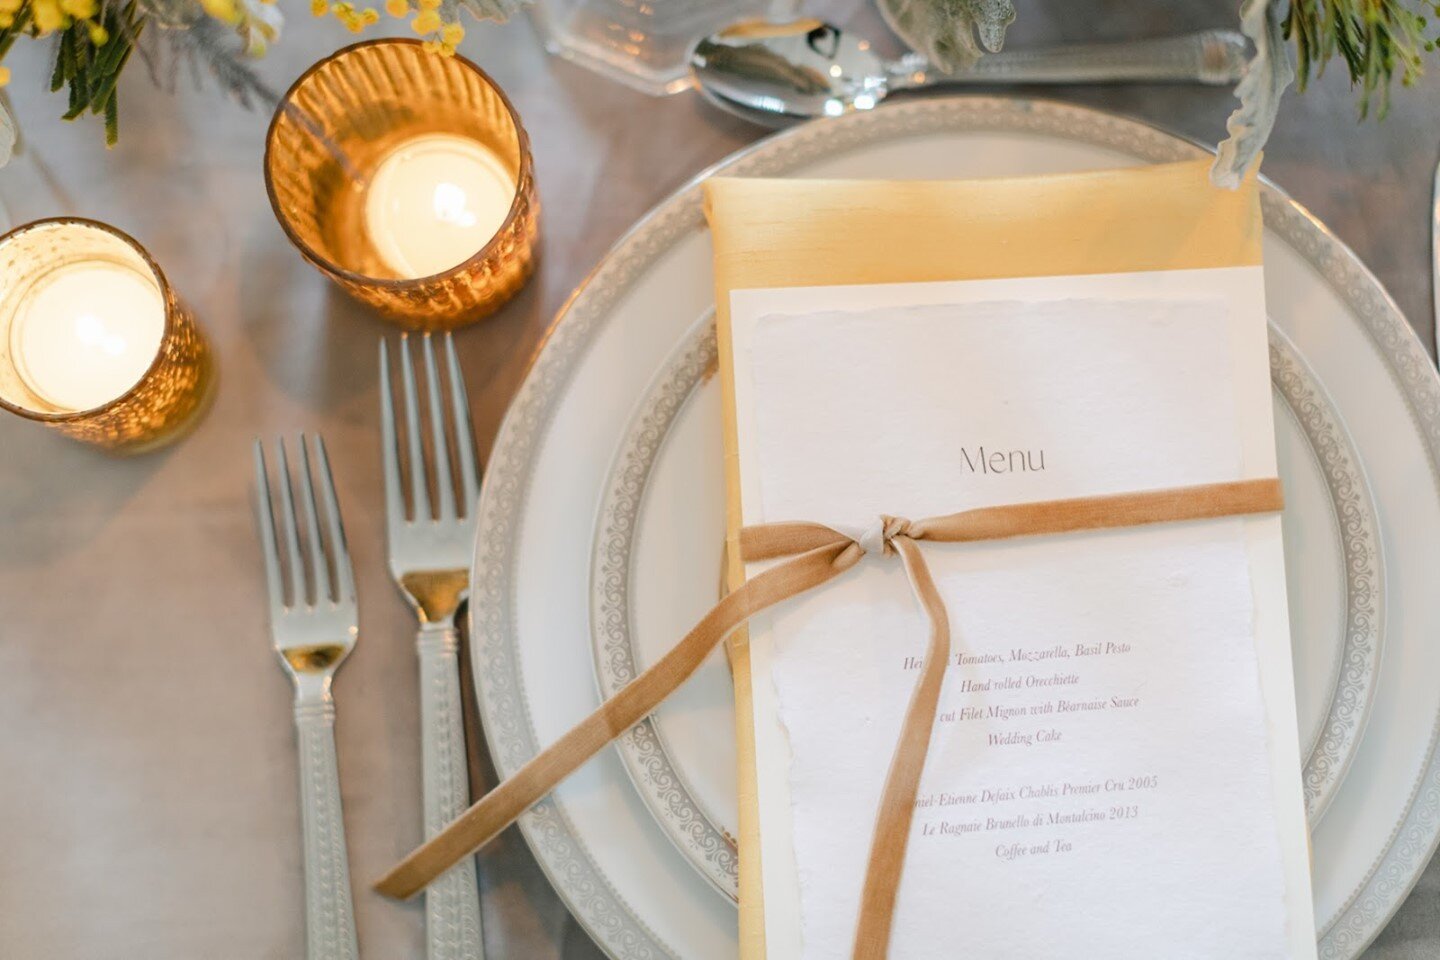 Planning your wedding menu? We&rsquo;ve got some tips to help you put together a delicious menu that your and your guests will love!

✨ Be considerate of guests and their allergies and/or preferences. Ask your caterer if they can accommodate those wi